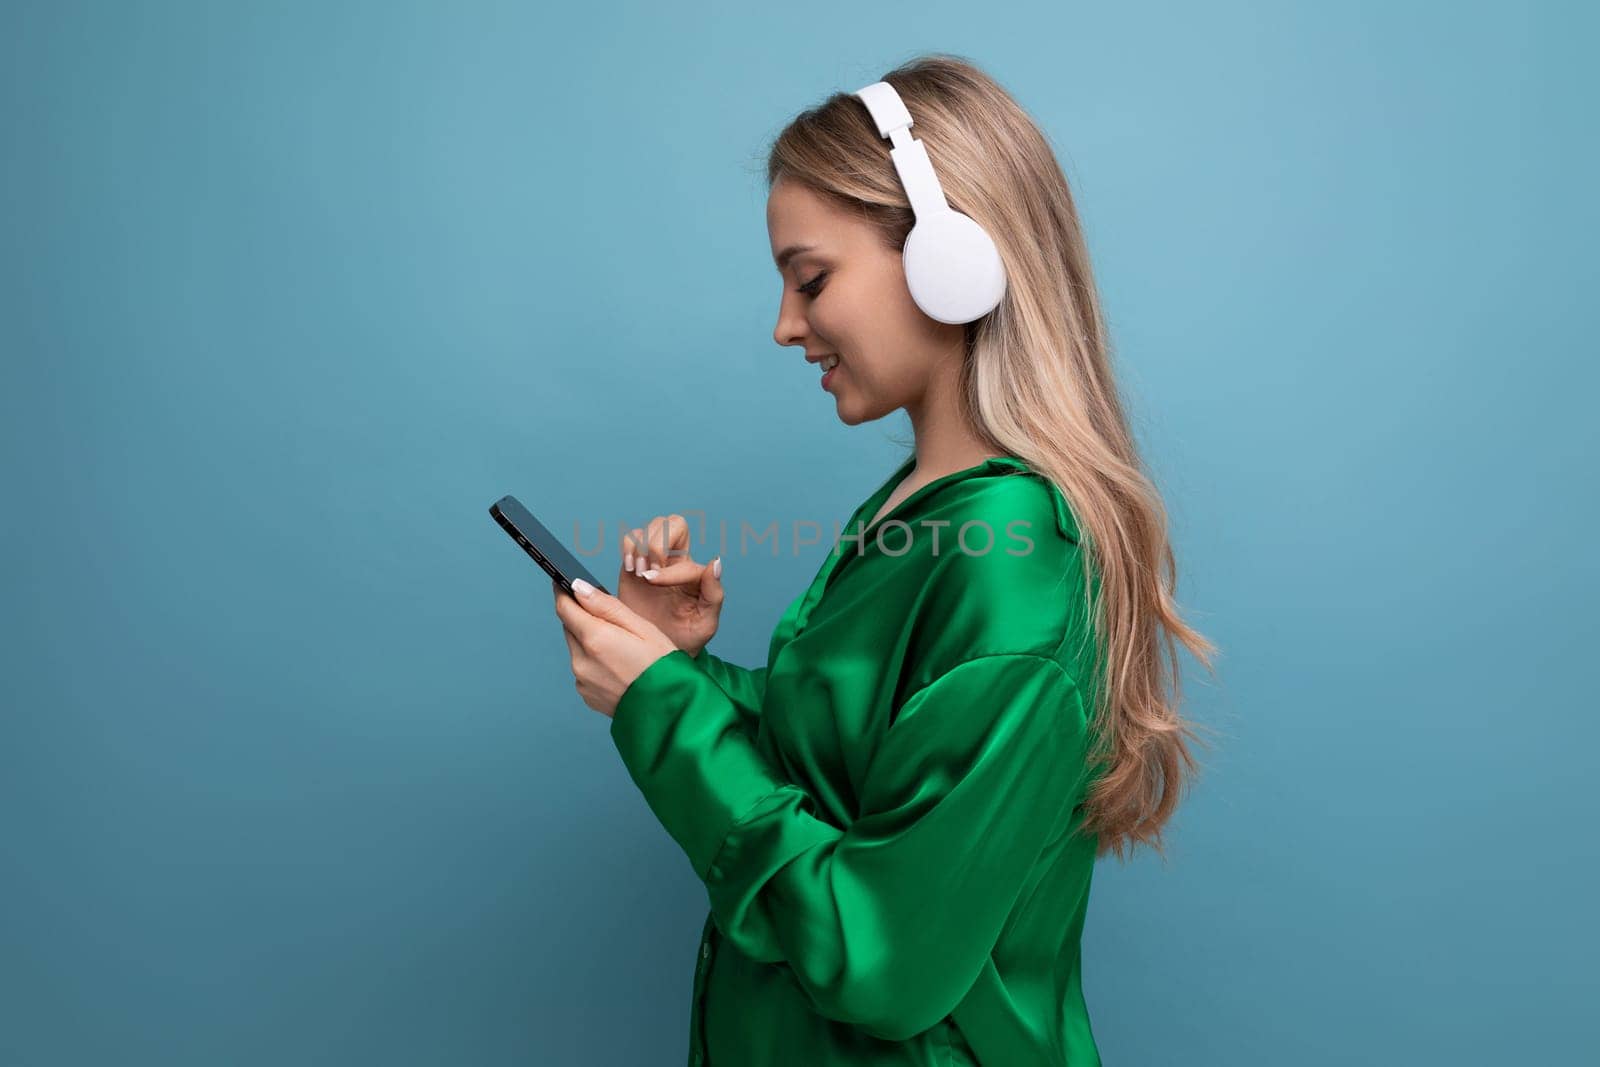 Profile photo of an attractive blond young adult woman in headphones on a blue background.